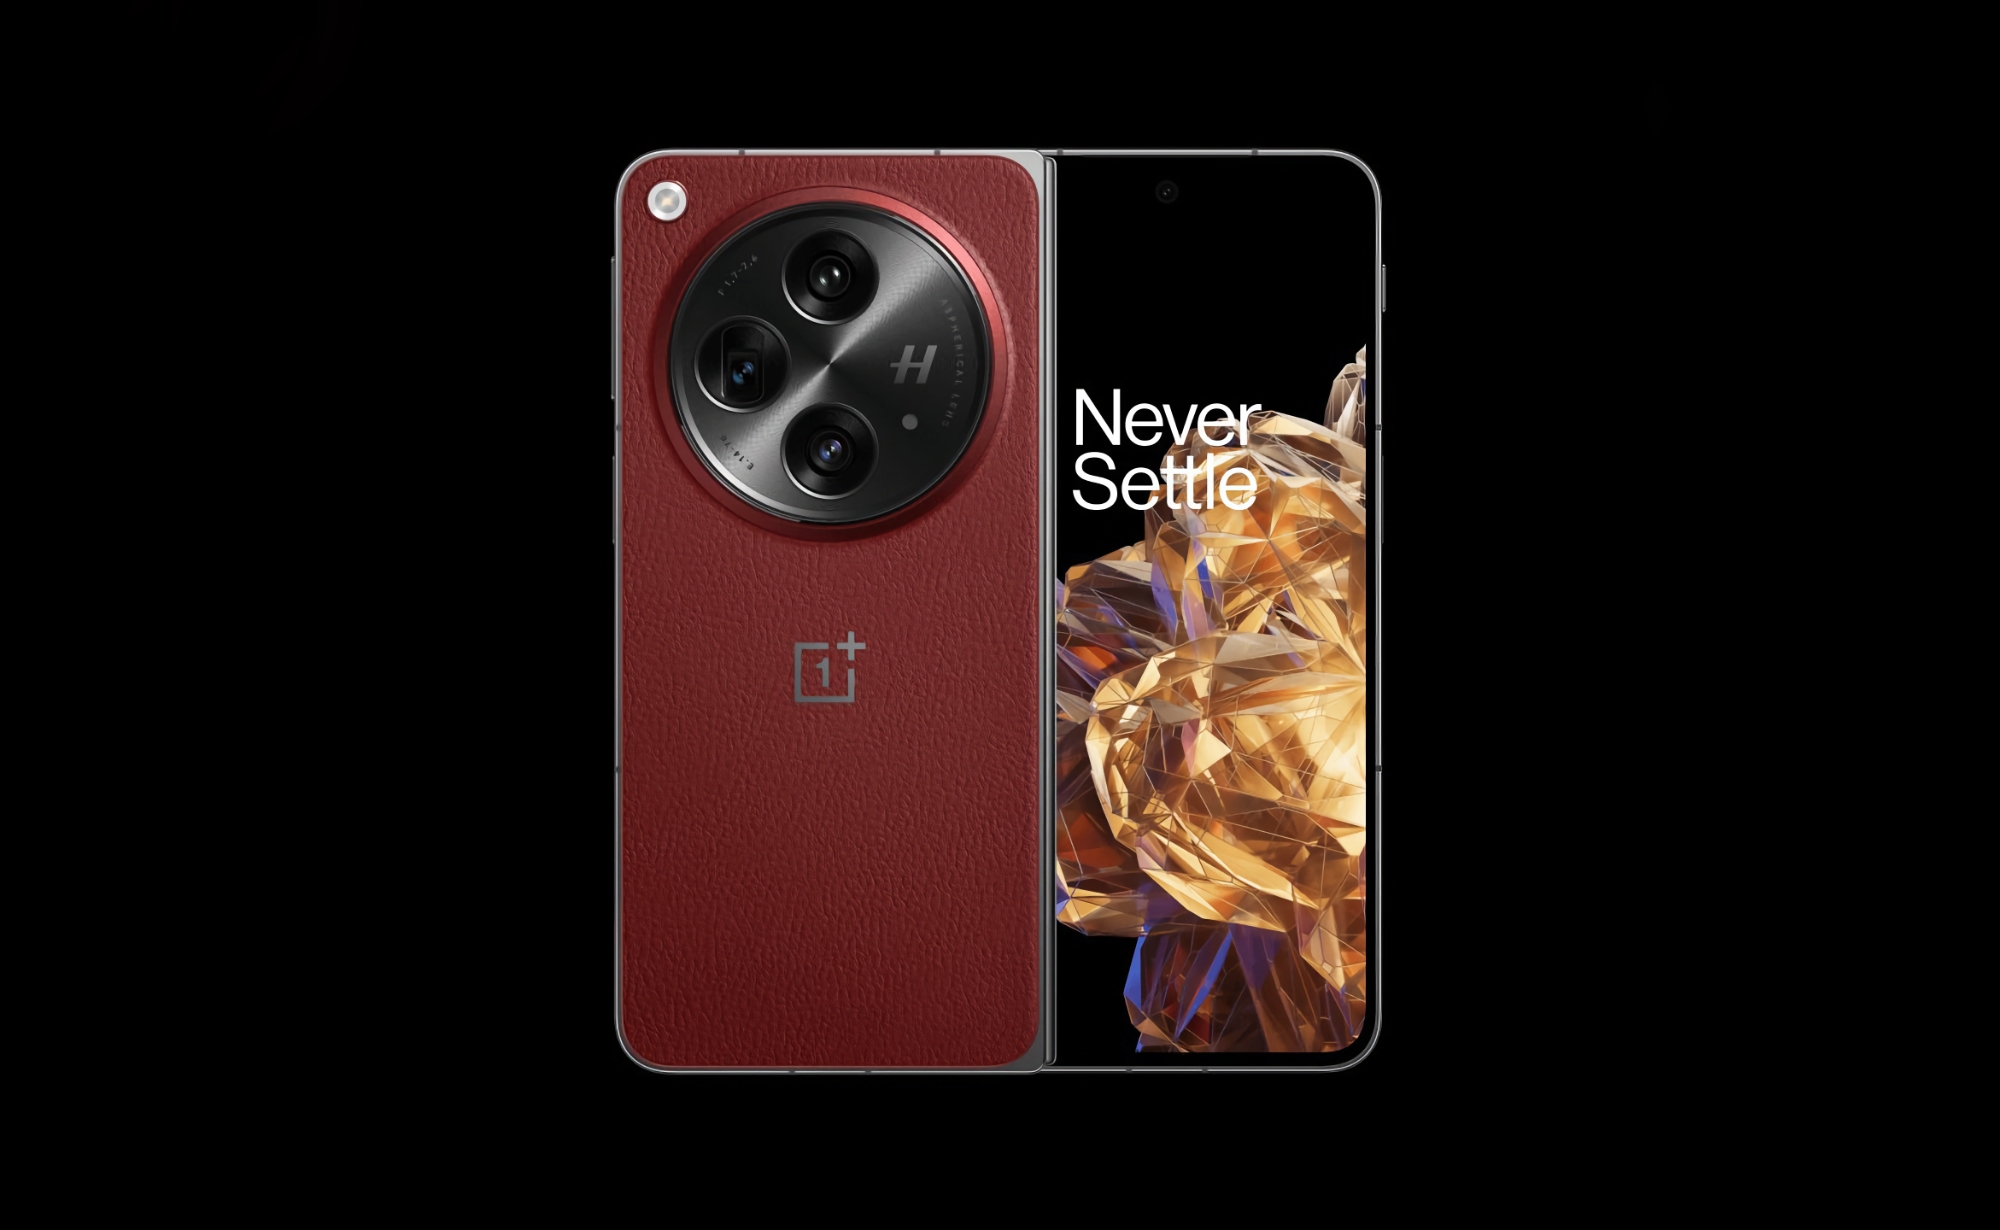 OnePlus Open will get a special version in red colour